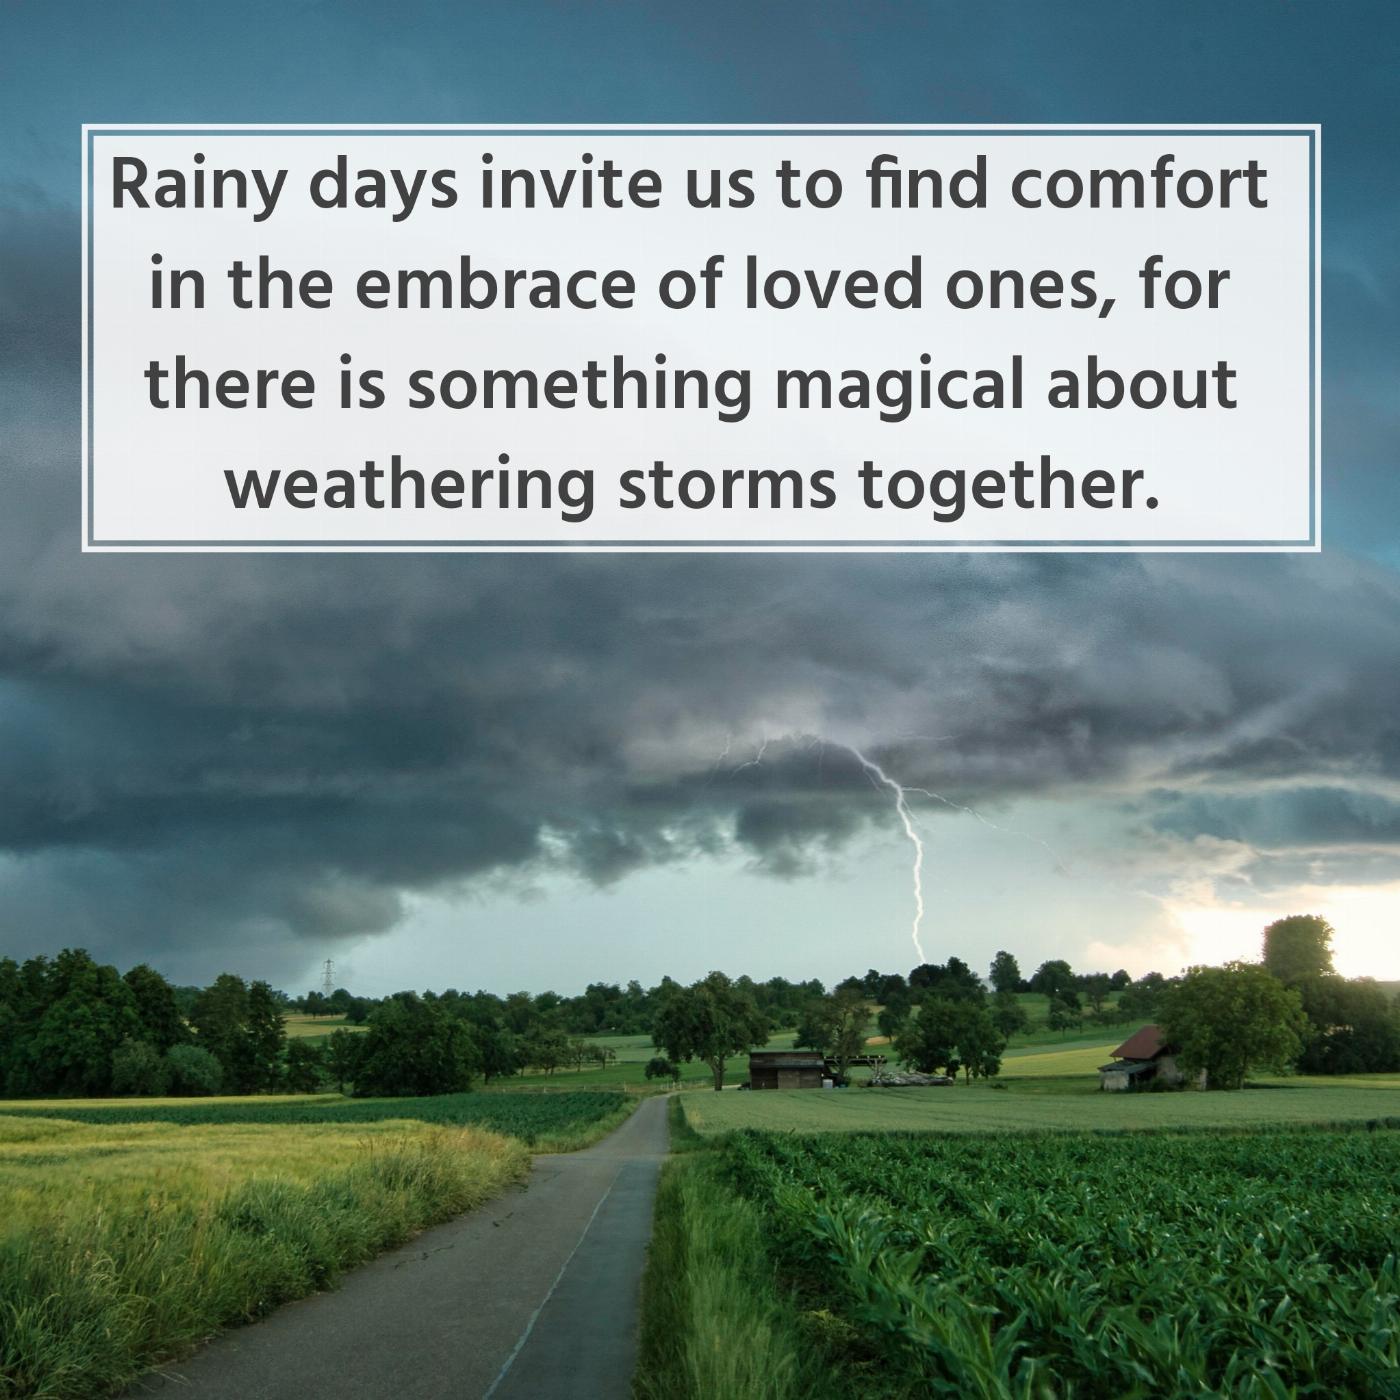 Rainy days invite us to find comfort in the embrace of loved ones